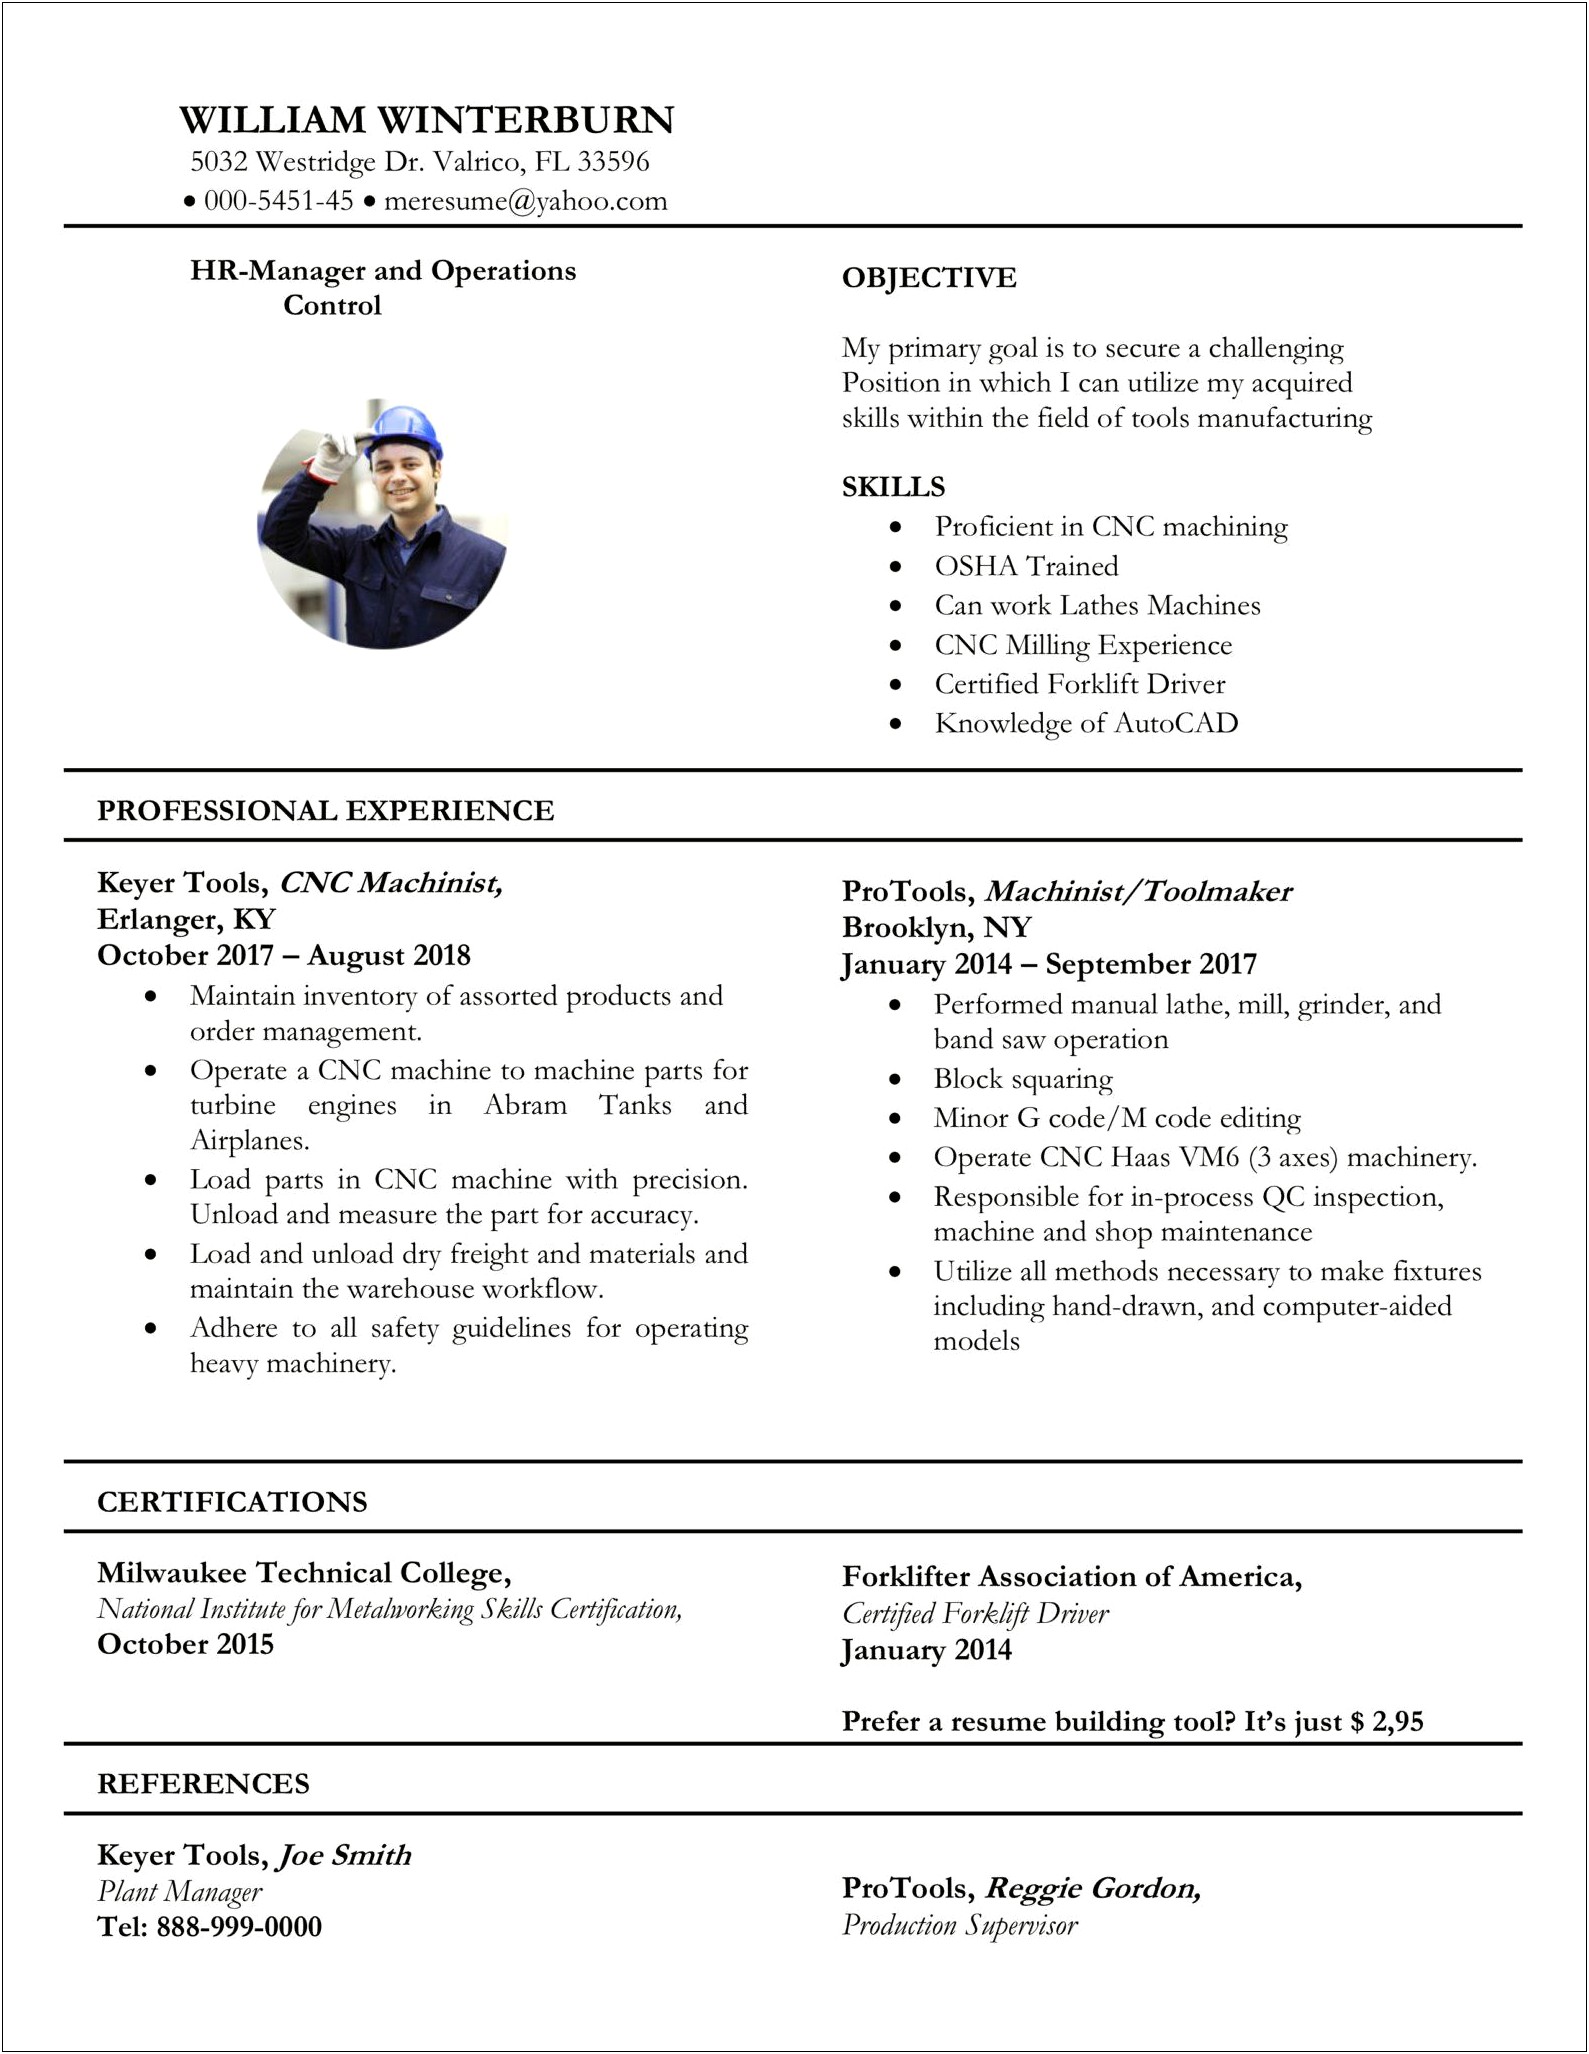 Formating The Profesional Experience In Resume